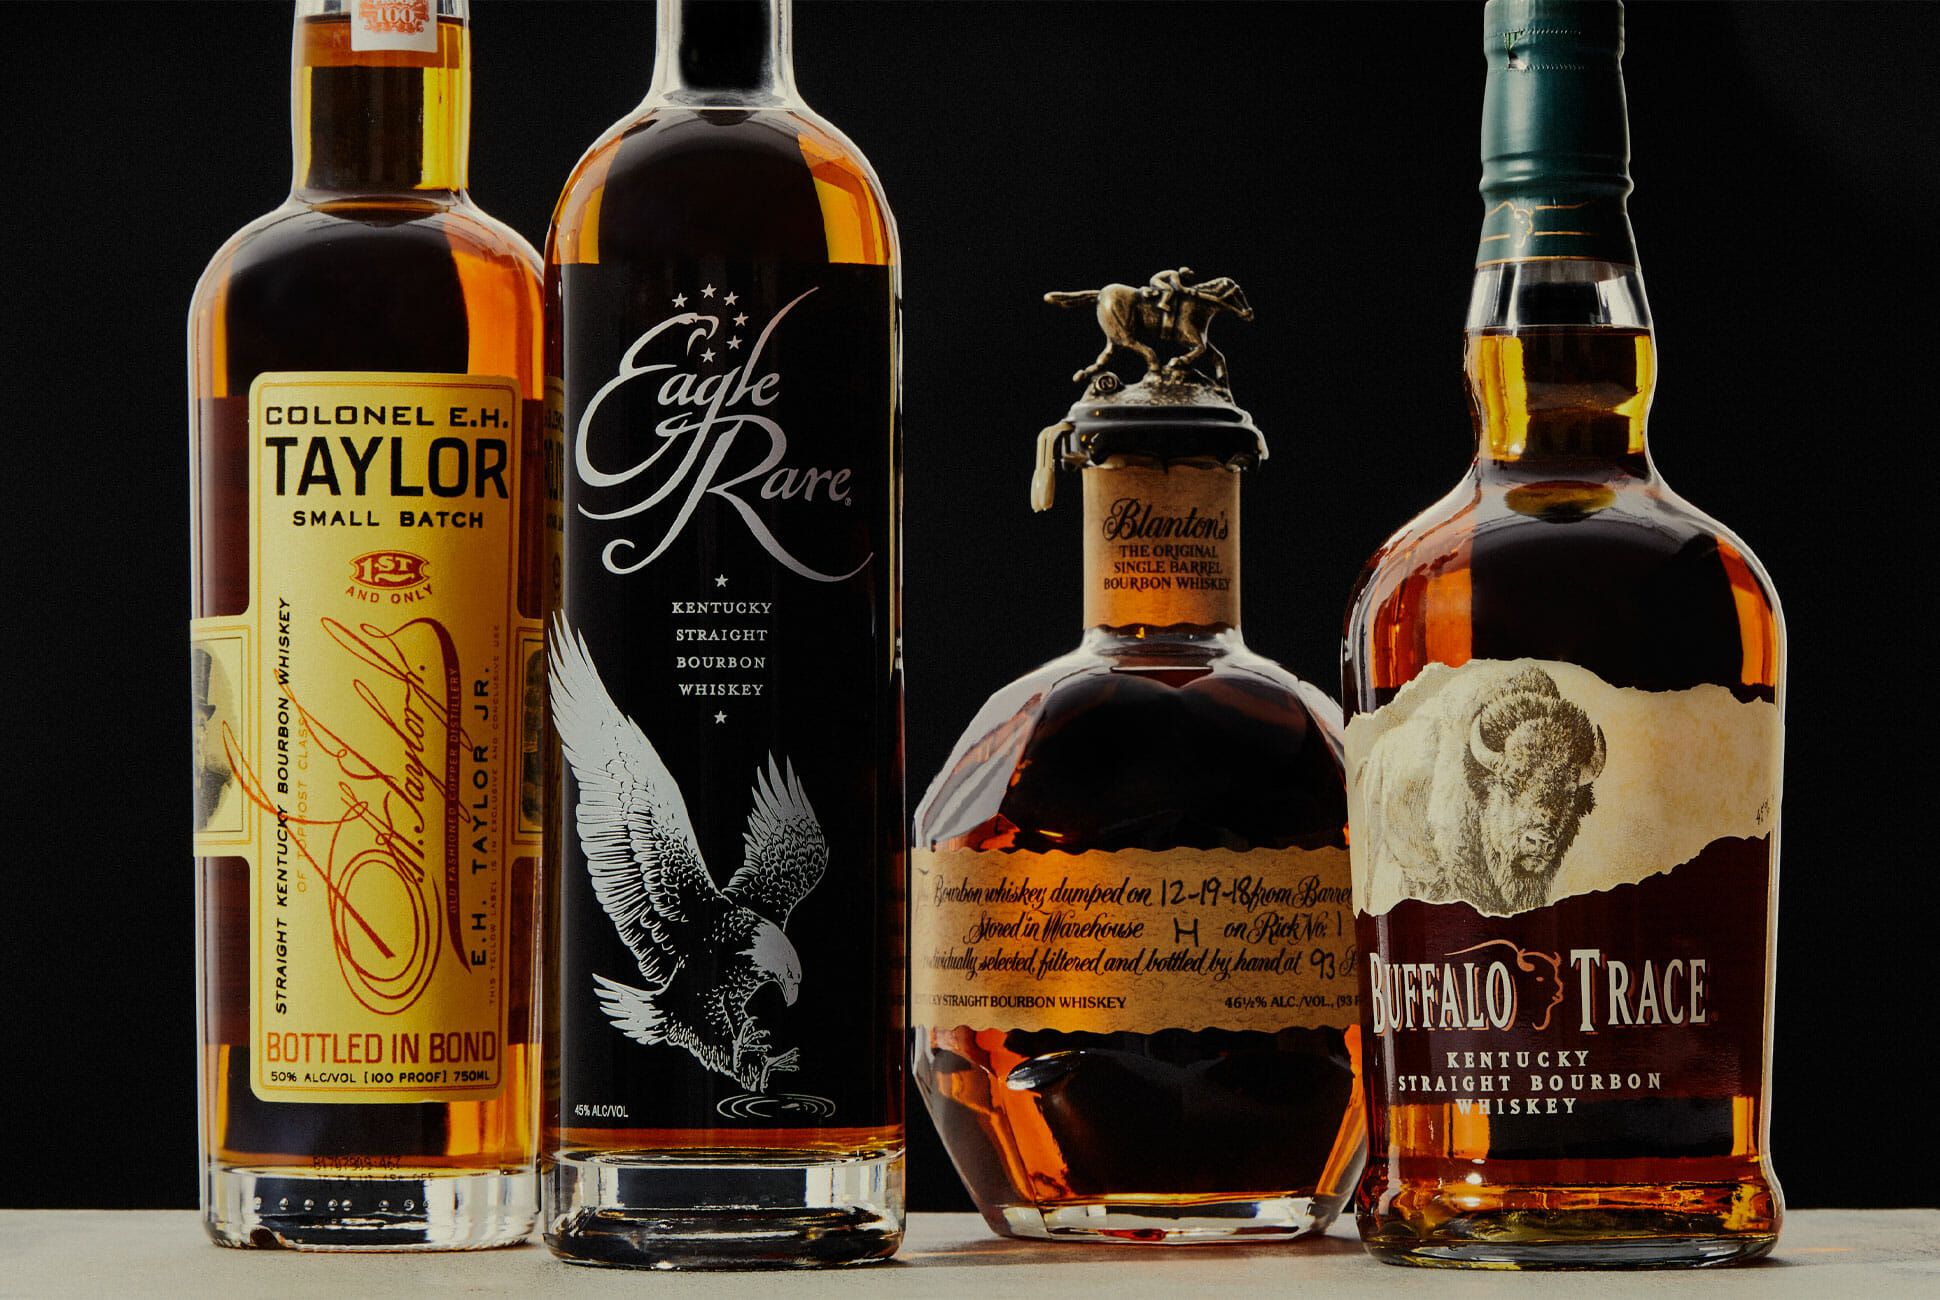 Buffalo Trace Whiskey: Important Brands, Bottles and